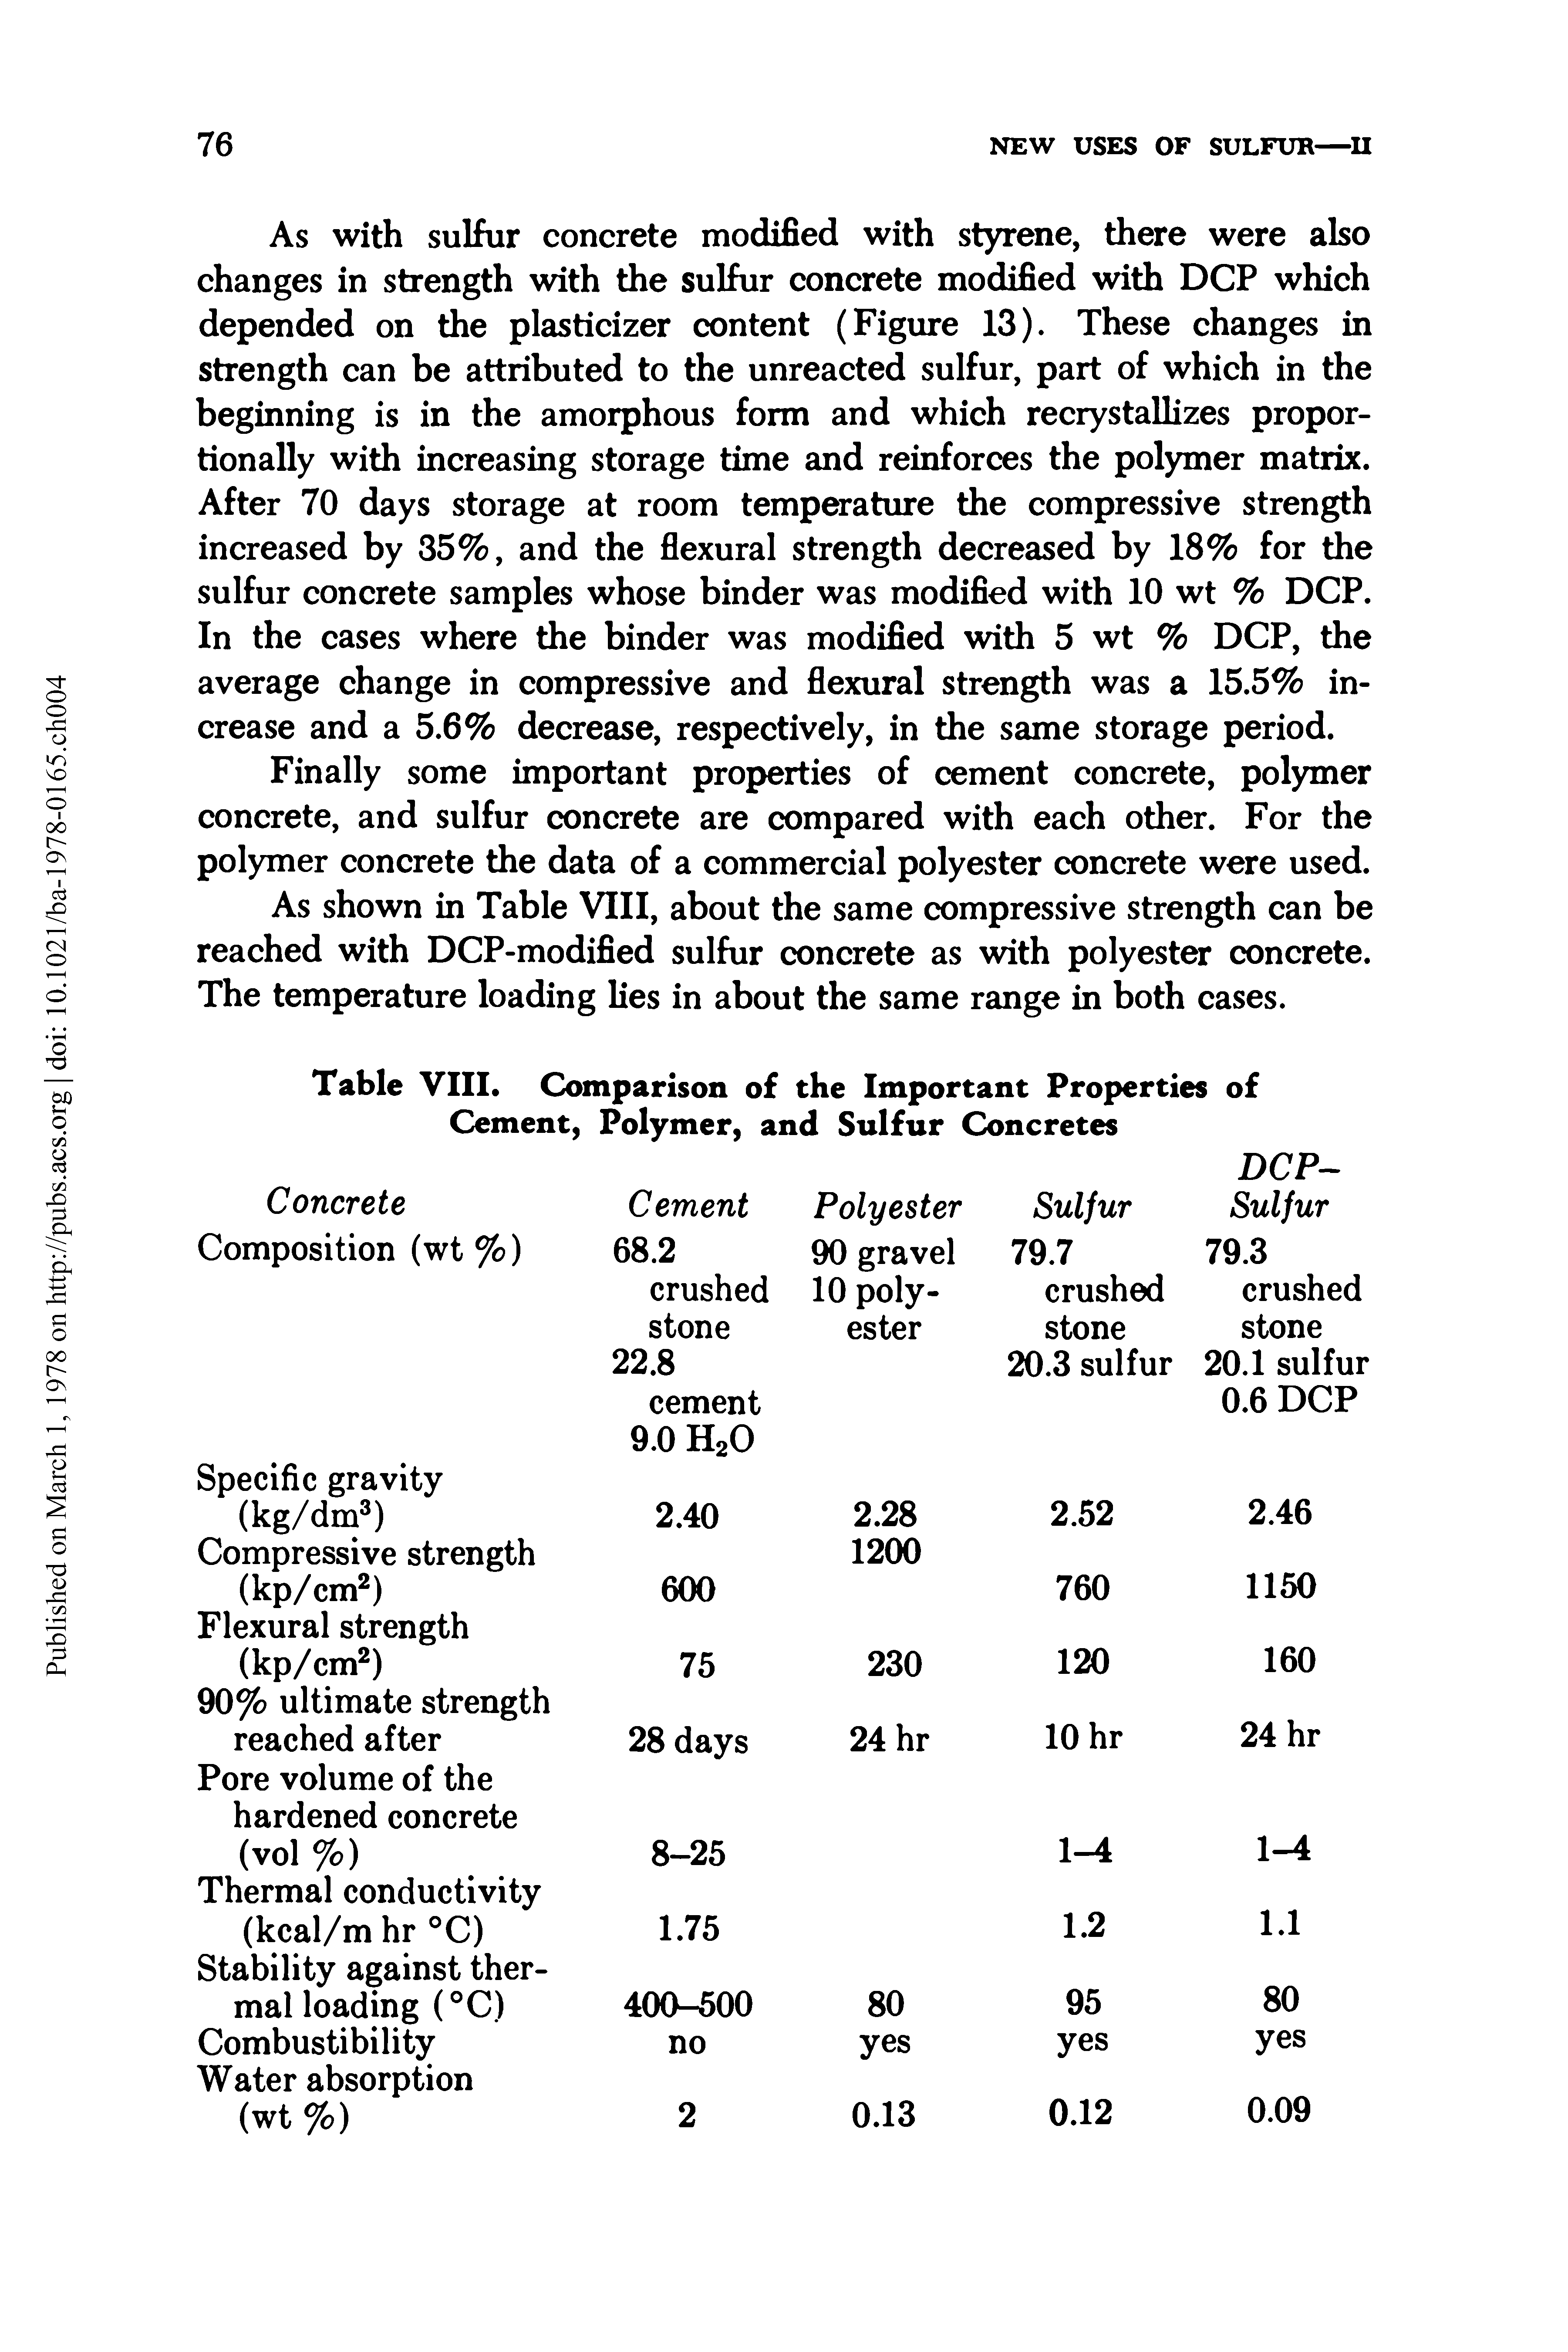 Table VIII. Comparison of the Important Properties of Cement, Polymer, and Sulfur Concretes...